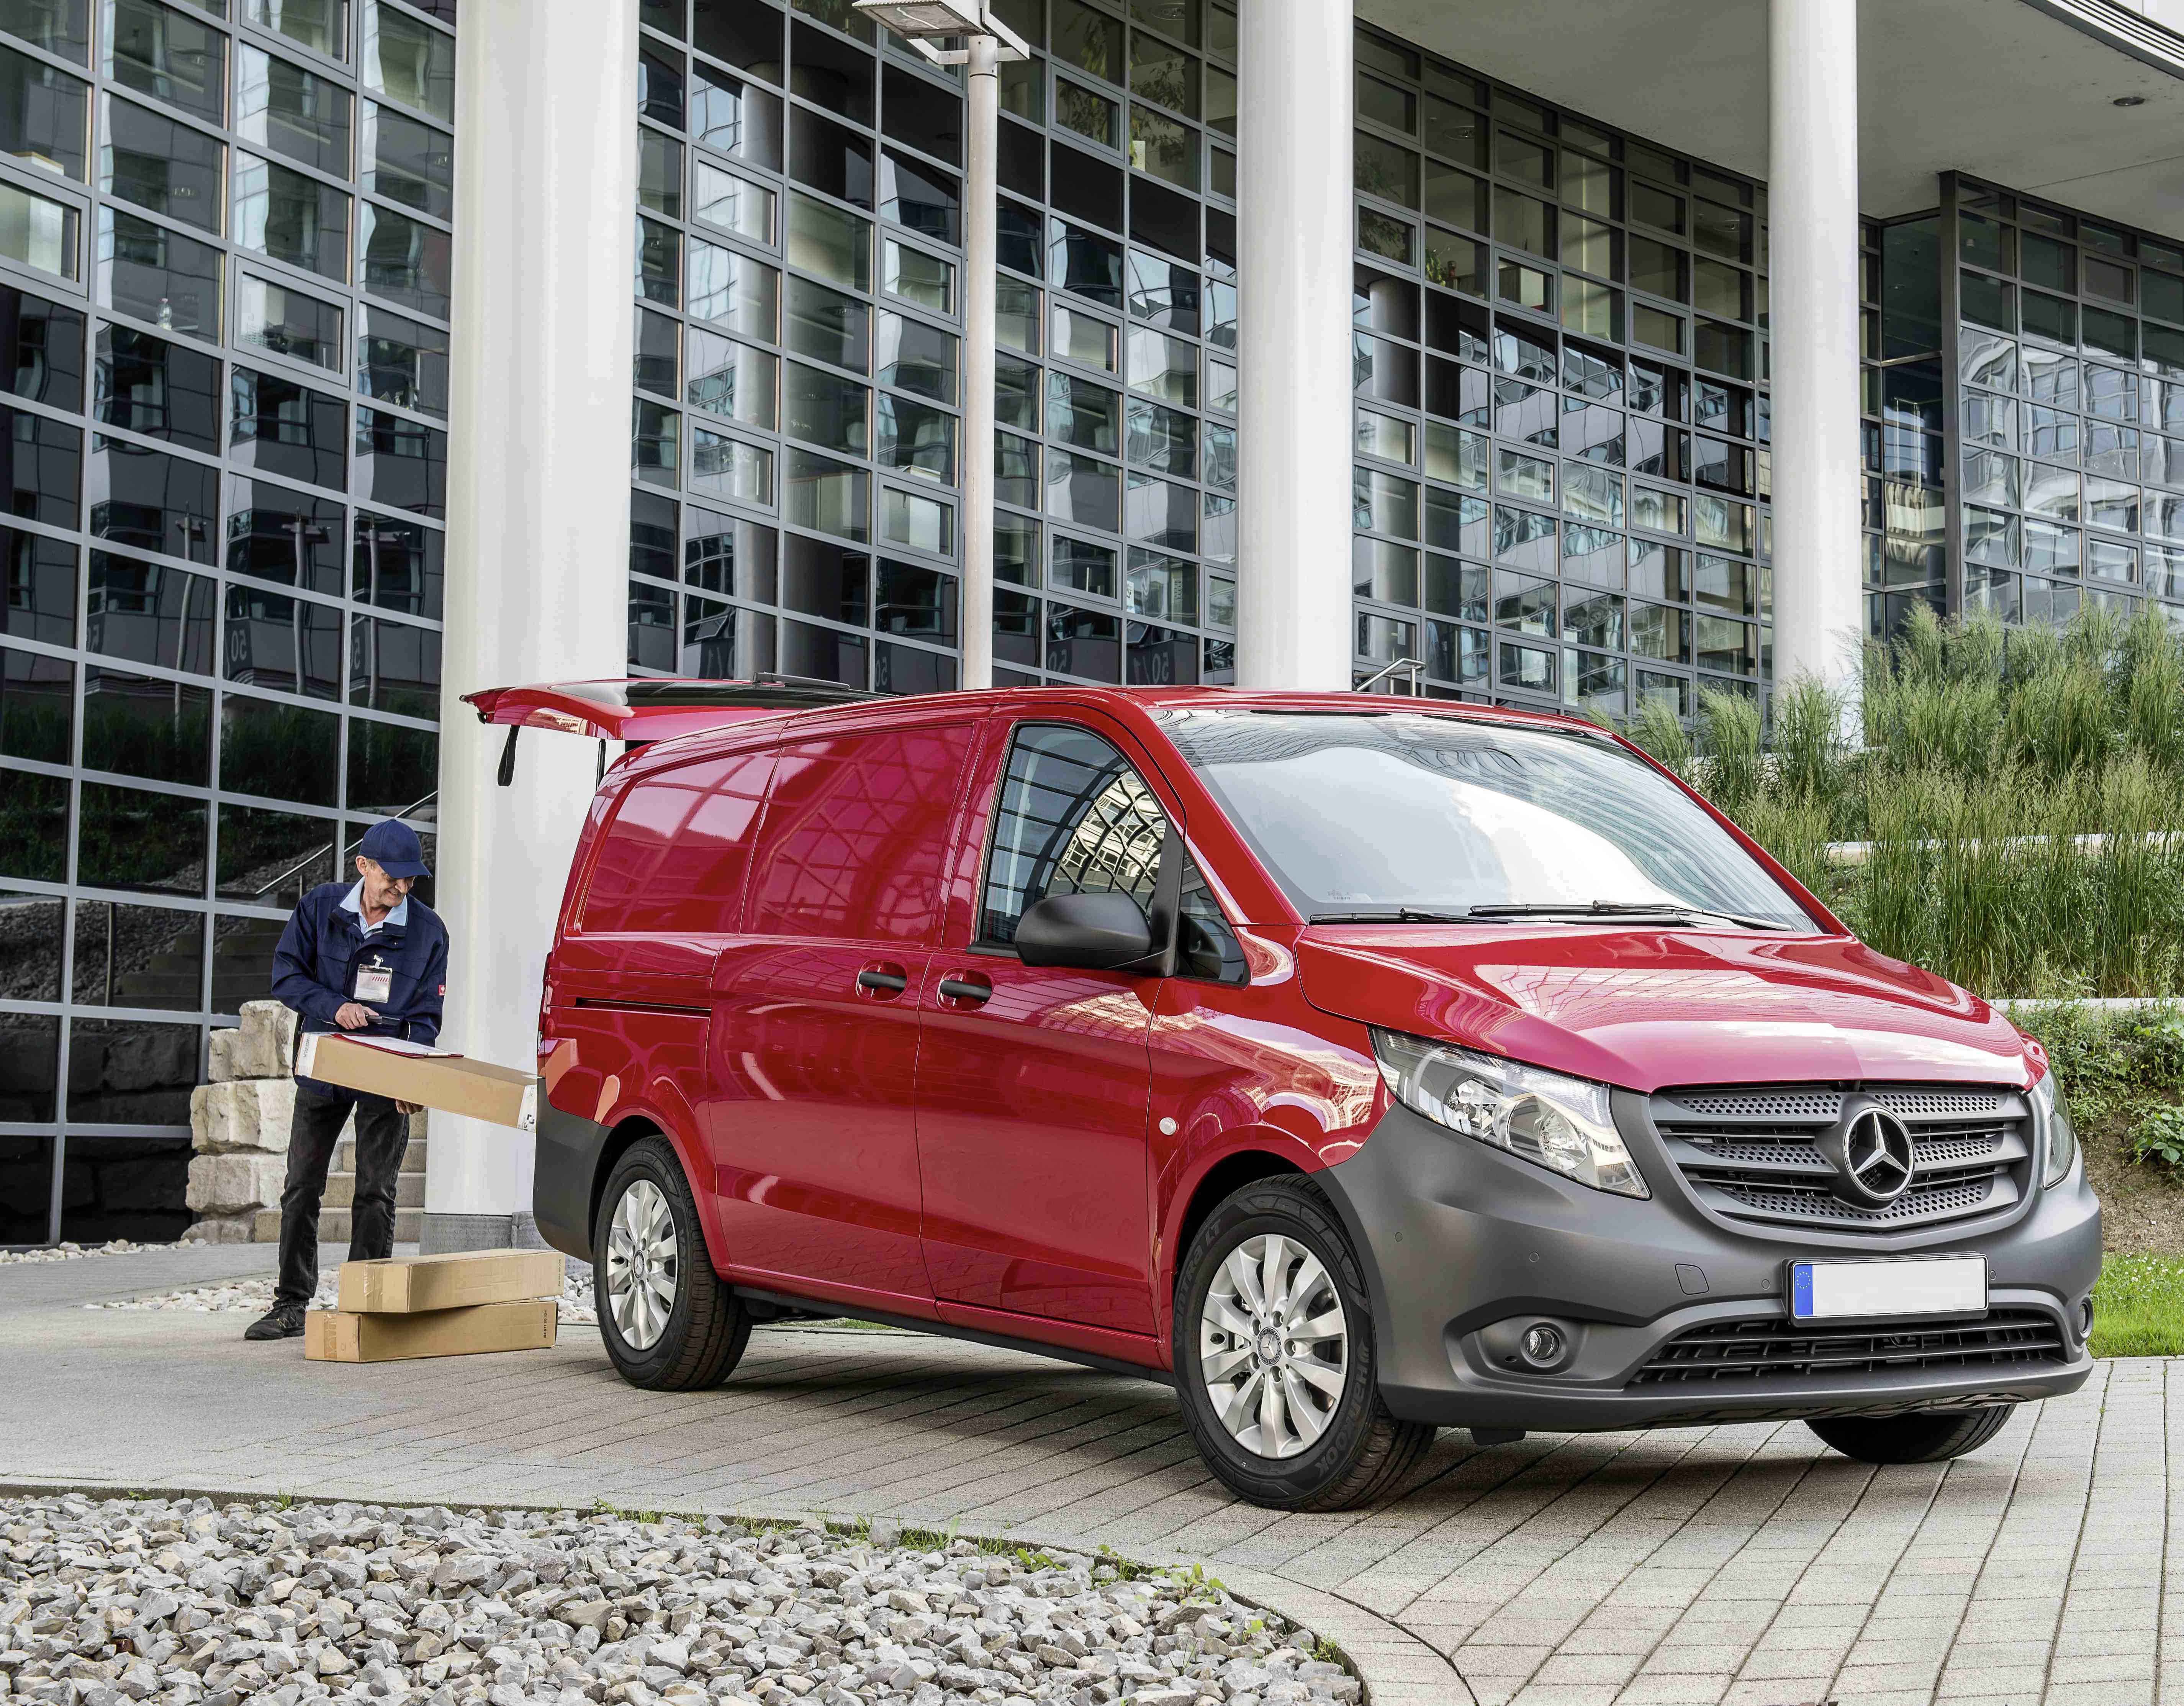 Ireland’s Van Hero 2019 will be offered the free use of a new Mercedes-Benz Sprinter or Vito van for a full year